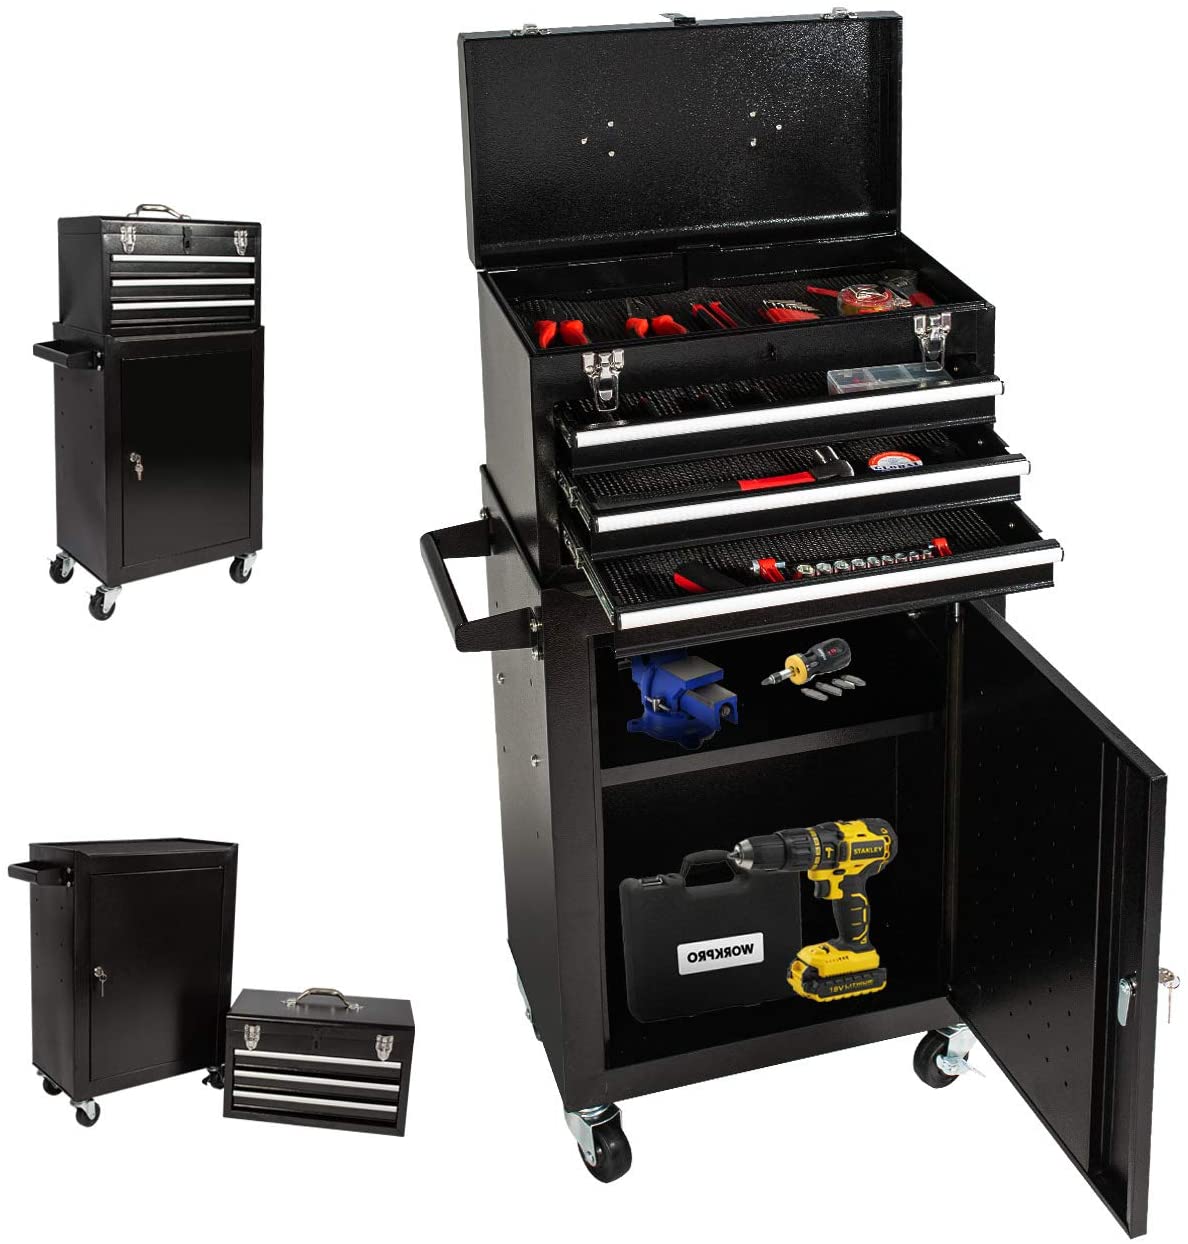 Photo 1 of 3Drawer Tool ChestRolling Tool Cabinet and Big Tool Storage Boxes Portable Removable Big Tool Chest with 4 Wheels Black